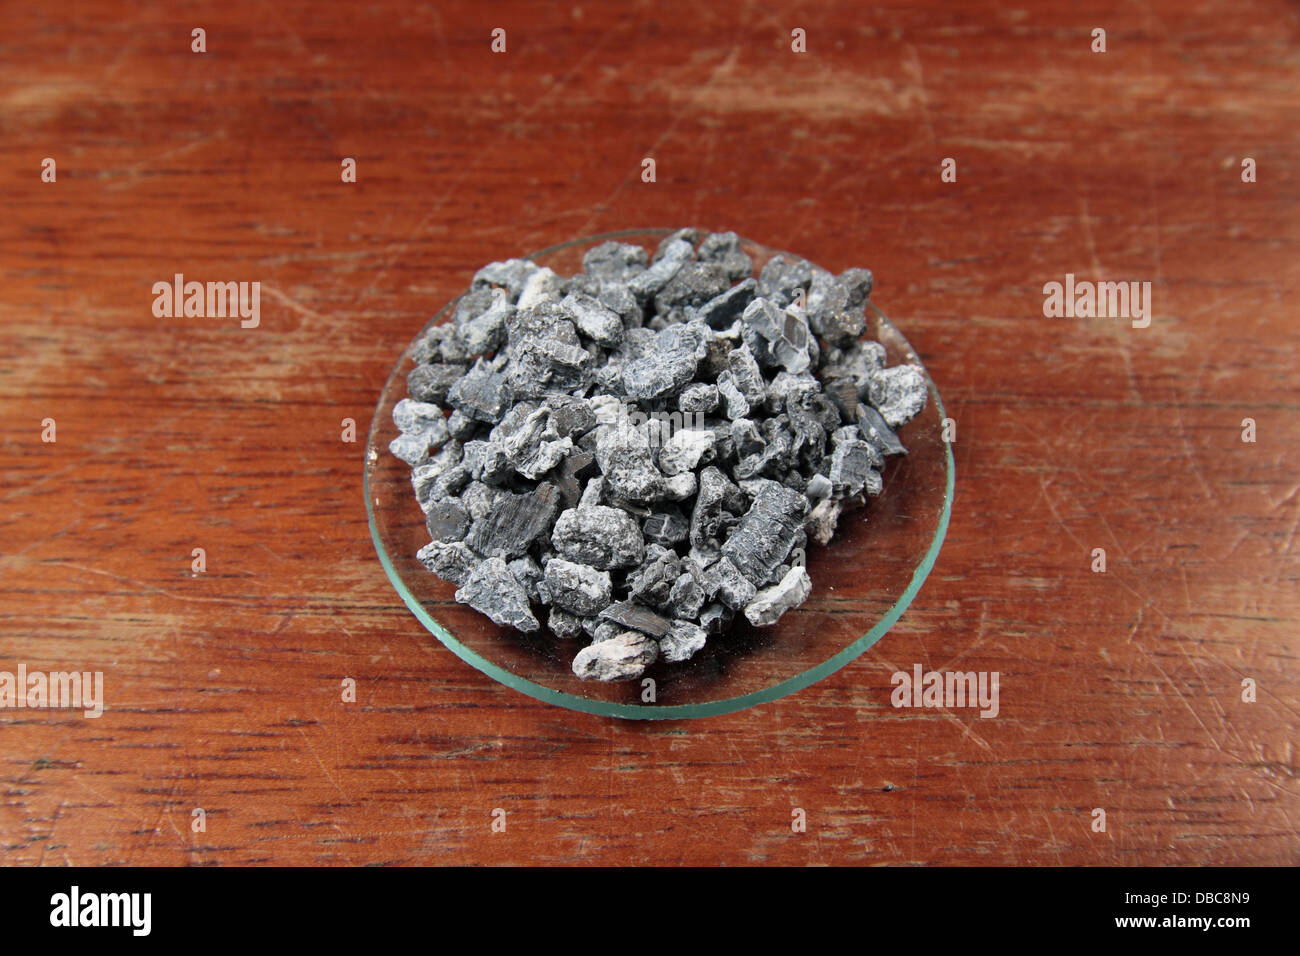 Granules of the metal calcium (Ca) as used in a UK high school. Stock Photo